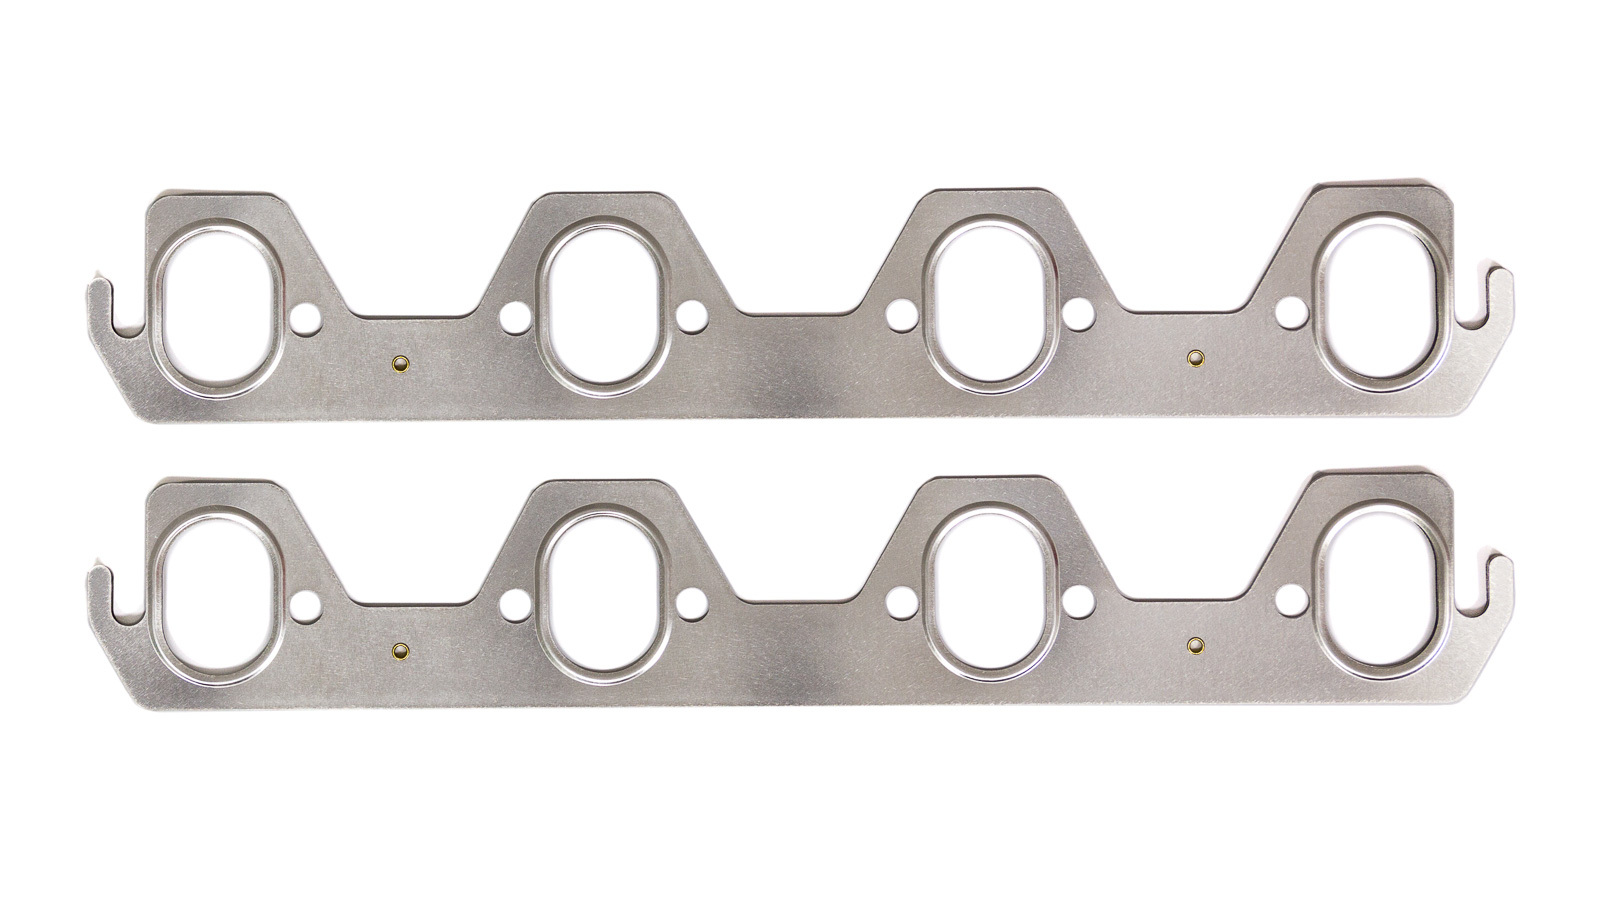 Cometic Gaskets C5899-030 - Exhaust Manifold / Header Gasket, 1.127 x 1.750 in N351 Port, Multi-Layer Steel, Small Block Ford, Pair